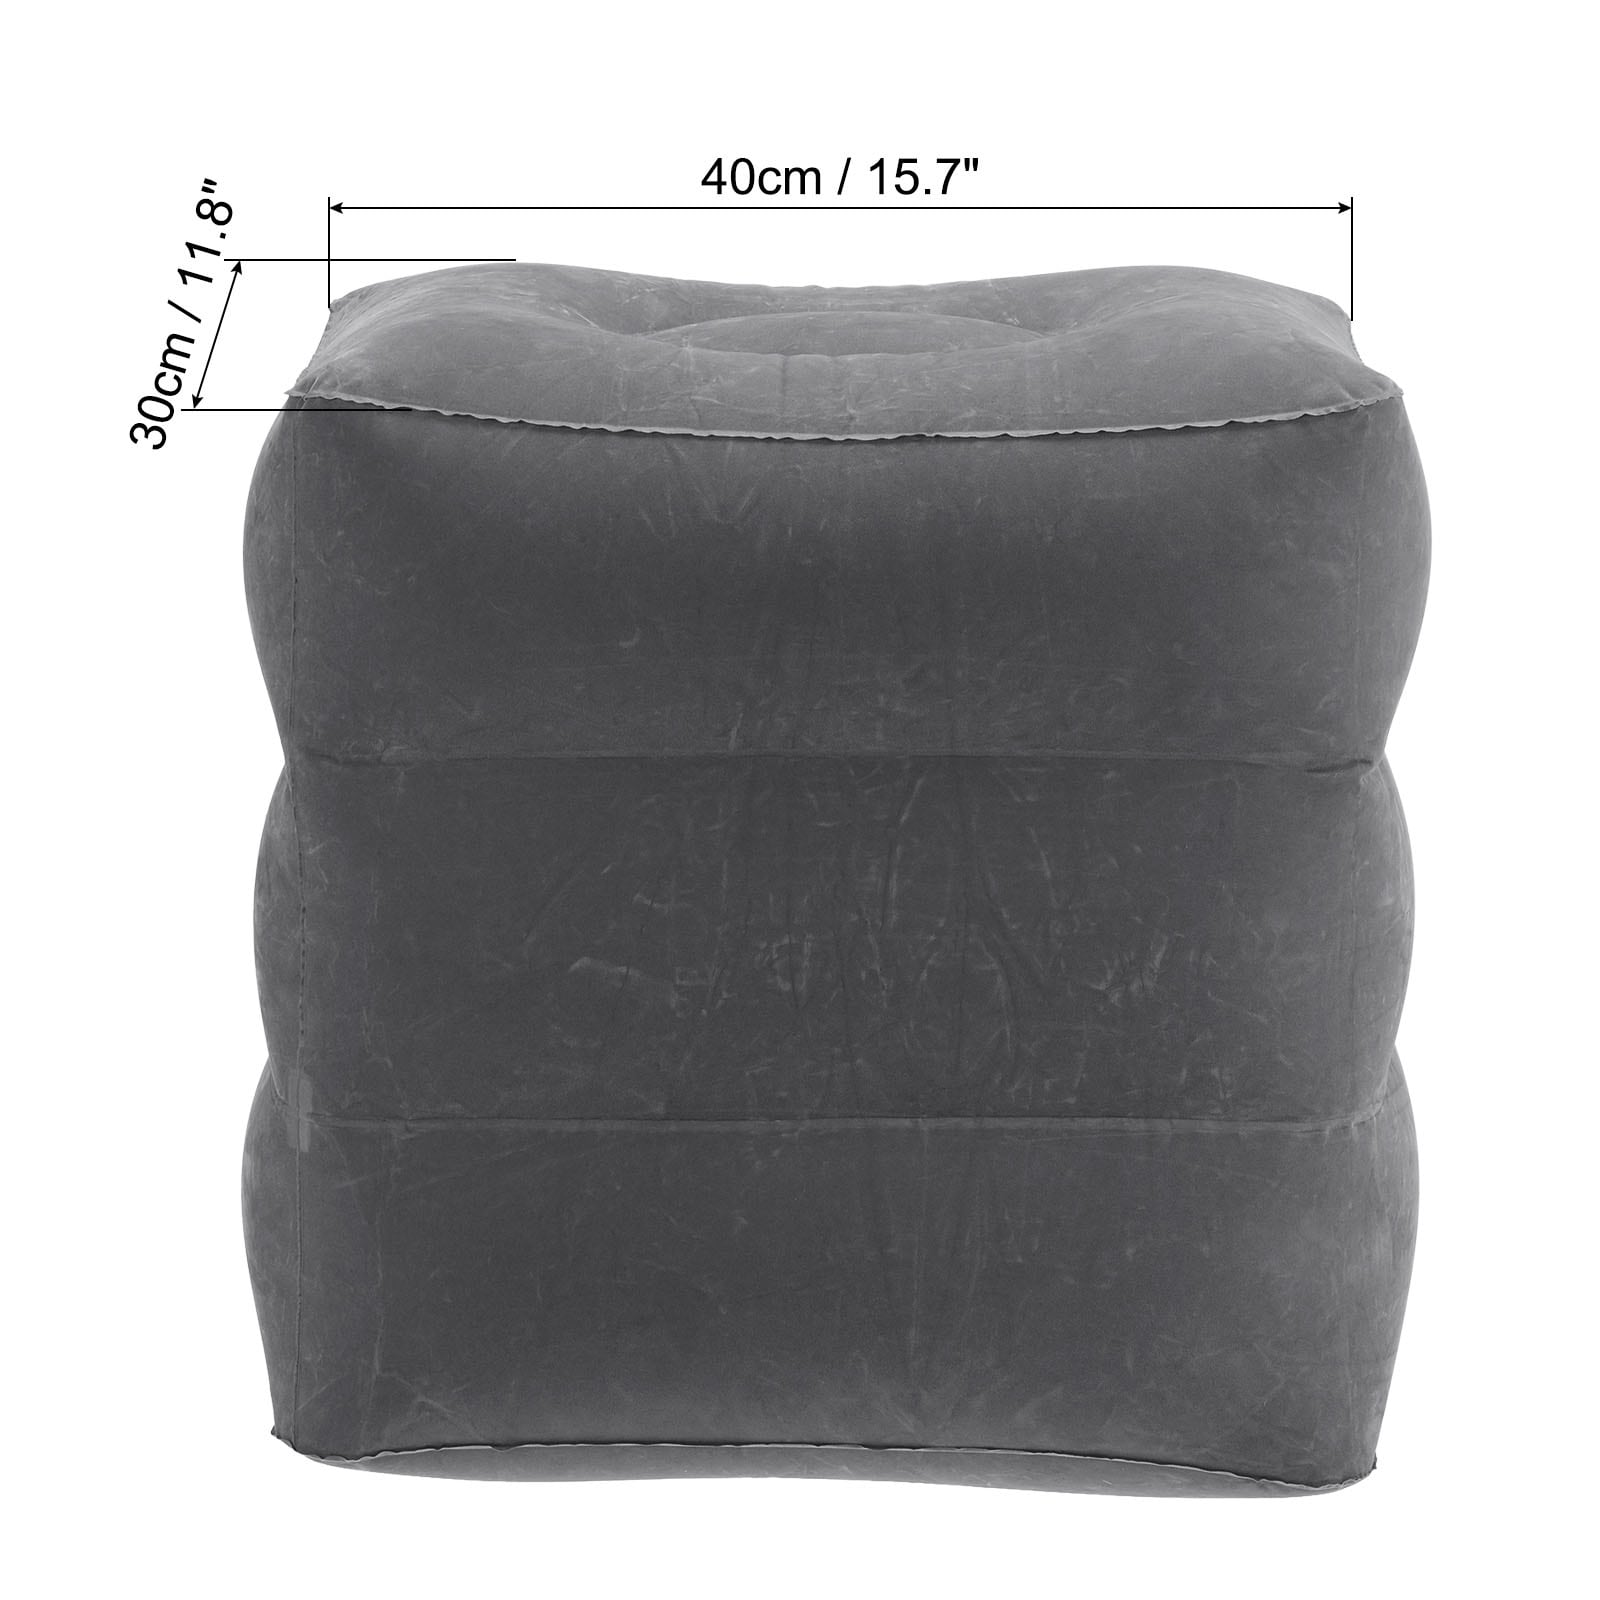 https://ak1.ostkcdn.com/images/products/is/images/direct/ca6ea7fbf4fdcd6f37944b3db6563bd6dbadc258/Travel-Foot-Rest-Pillow%2C-Inflatable-Adjustable-3-Layers-Height%2C-Black.jpg